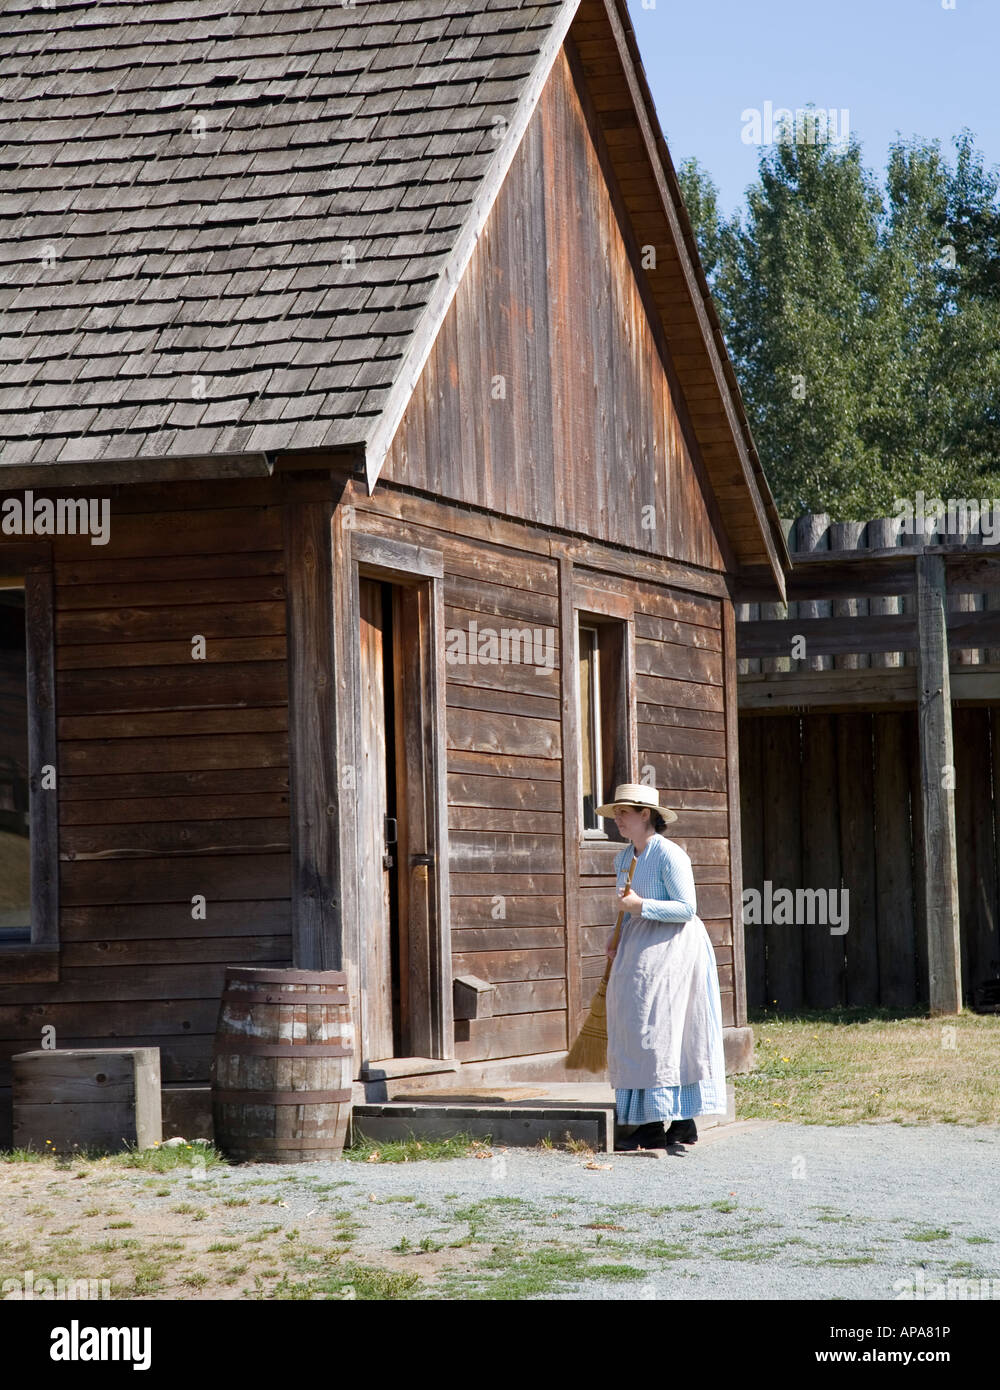 Woman in period costume sweeping steps outside wooden cabin Fort Langley British Columbia Canada Stock Photo